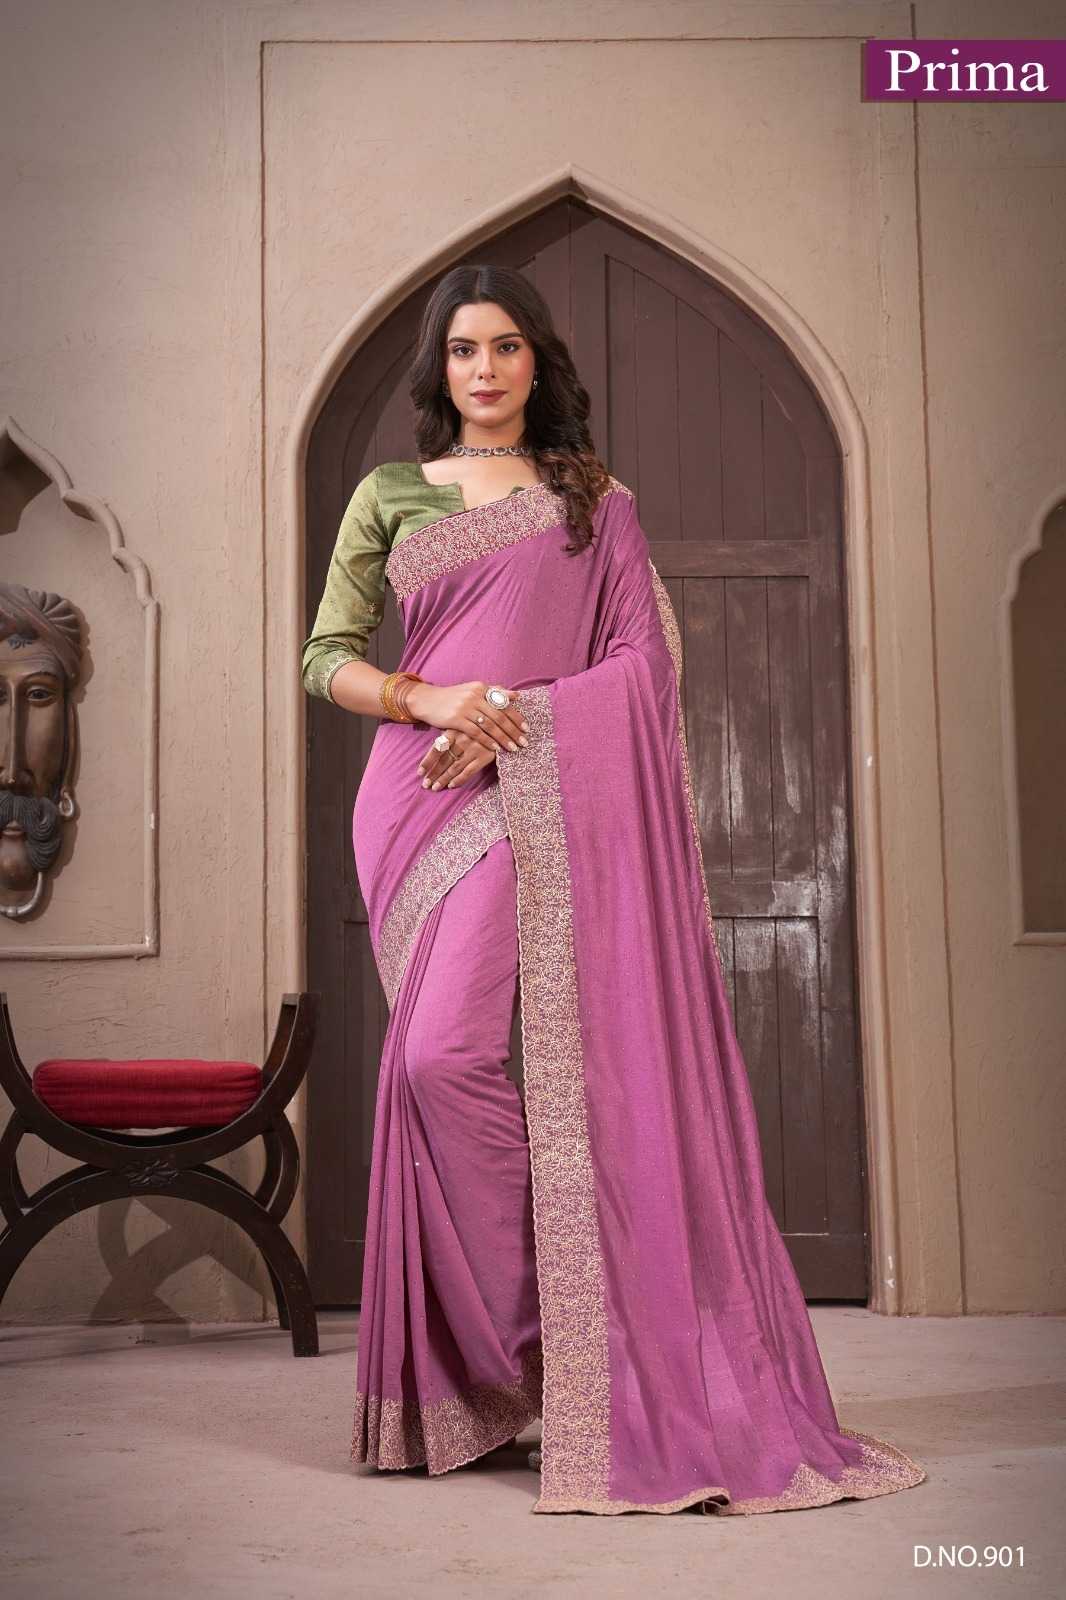 901 to 908  prima lateat vichitra blooming fashionable design fancy saree exports 